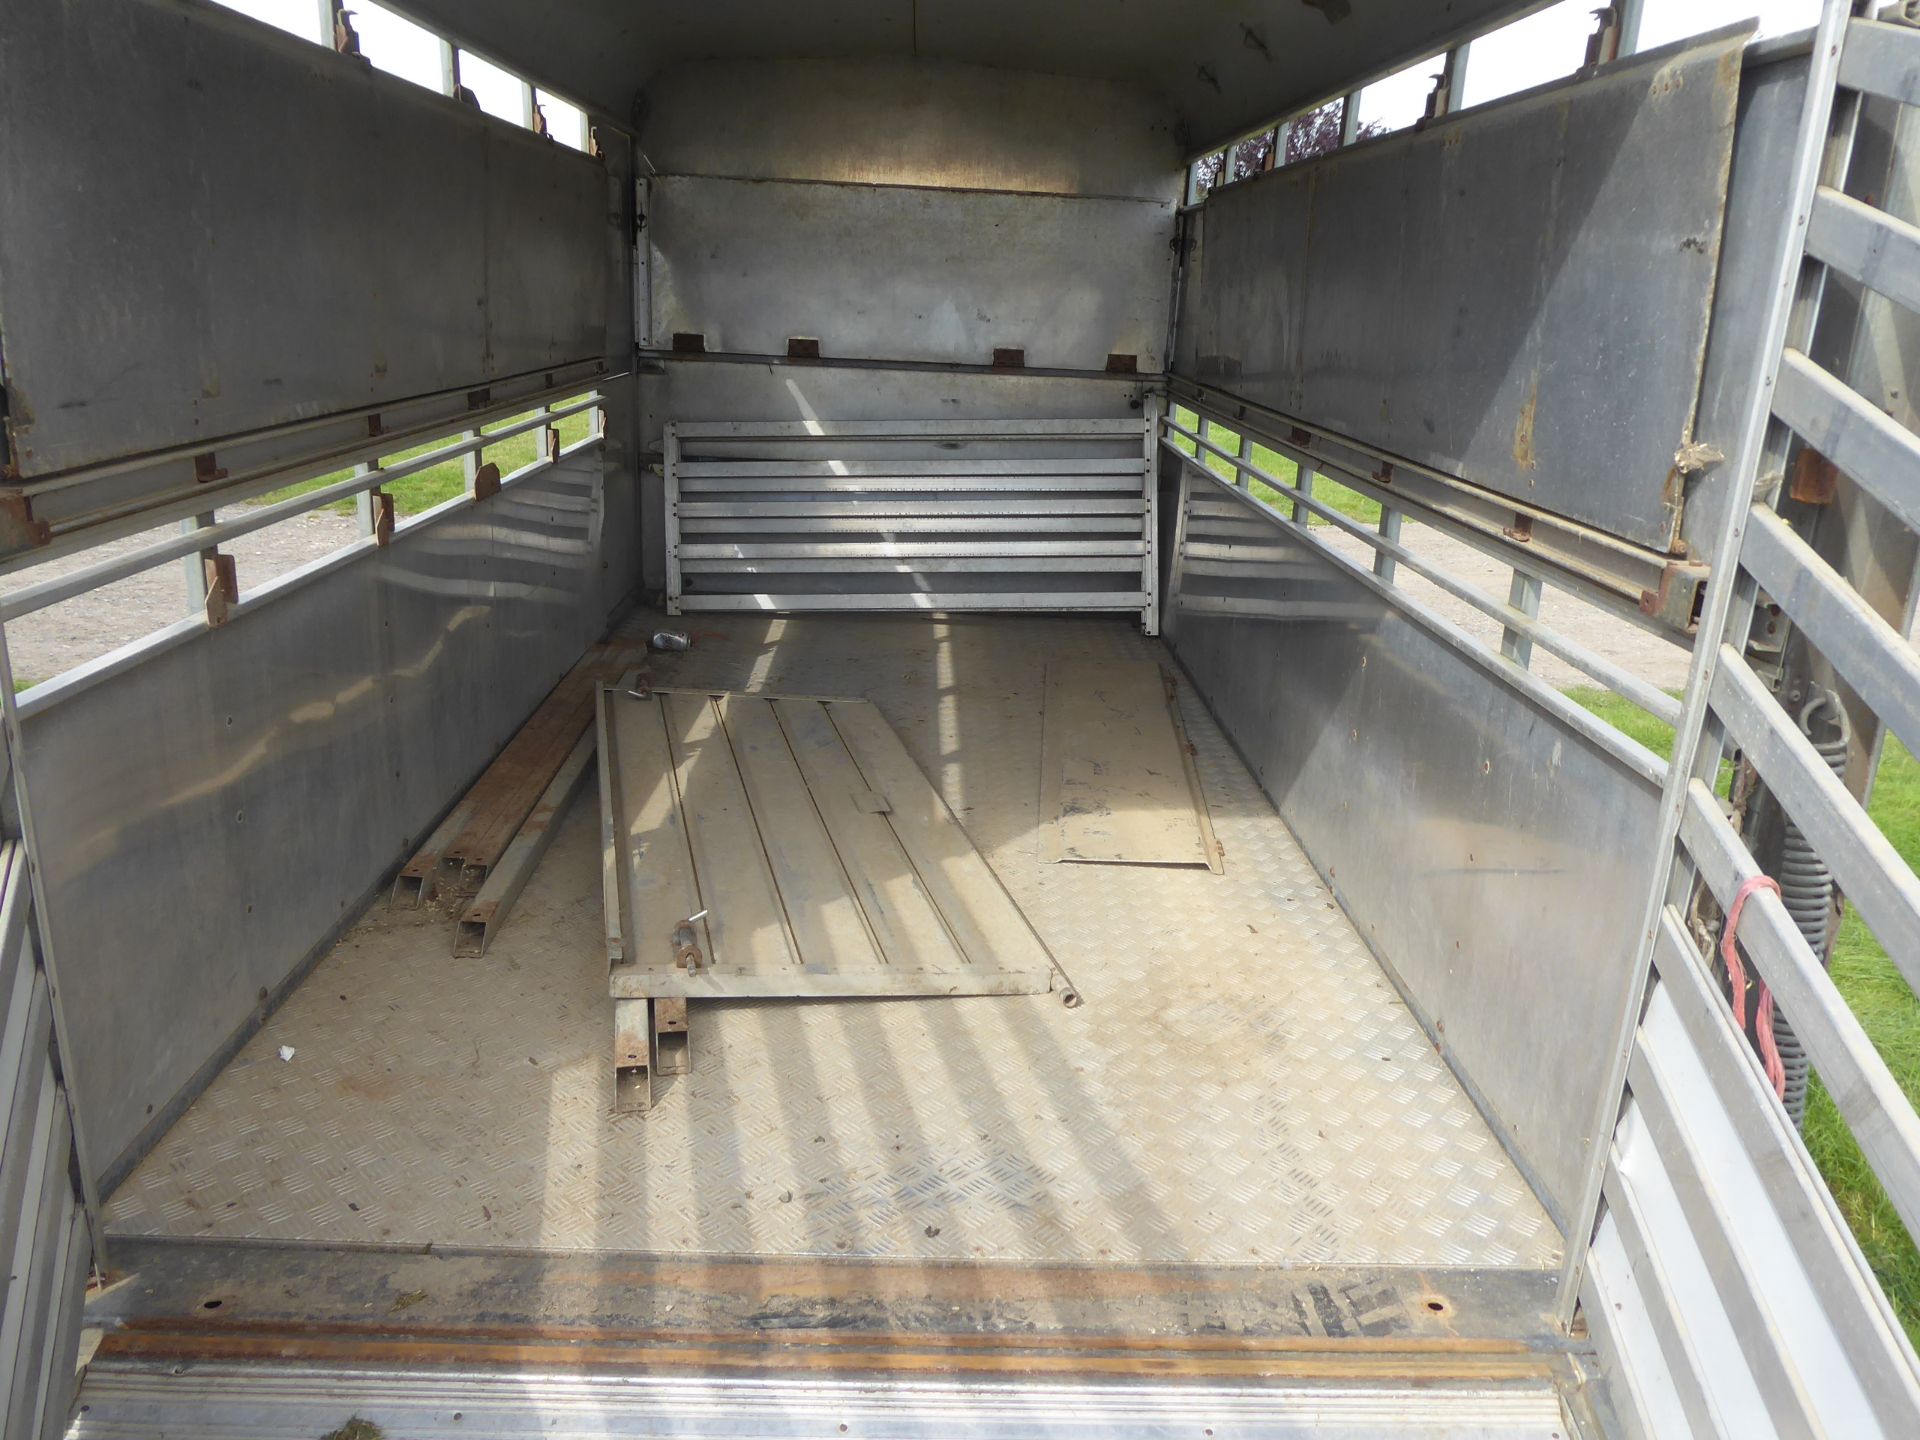 Ifor Williams 12ft tri-axle cattle trailer c/w sheep decks - Image 4 of 4